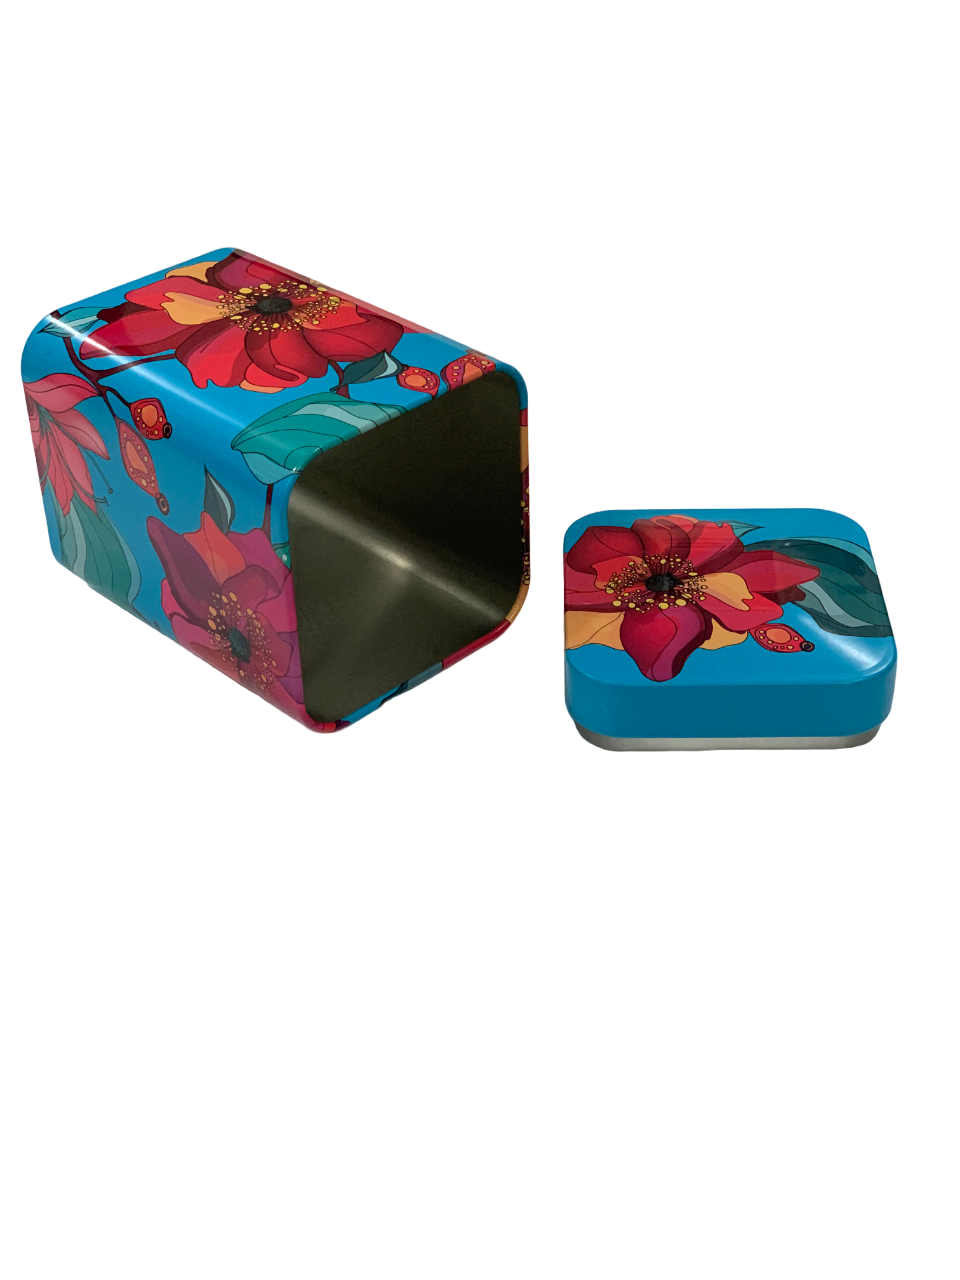 Poppy Tea Caddy - Yellow or Turquoise